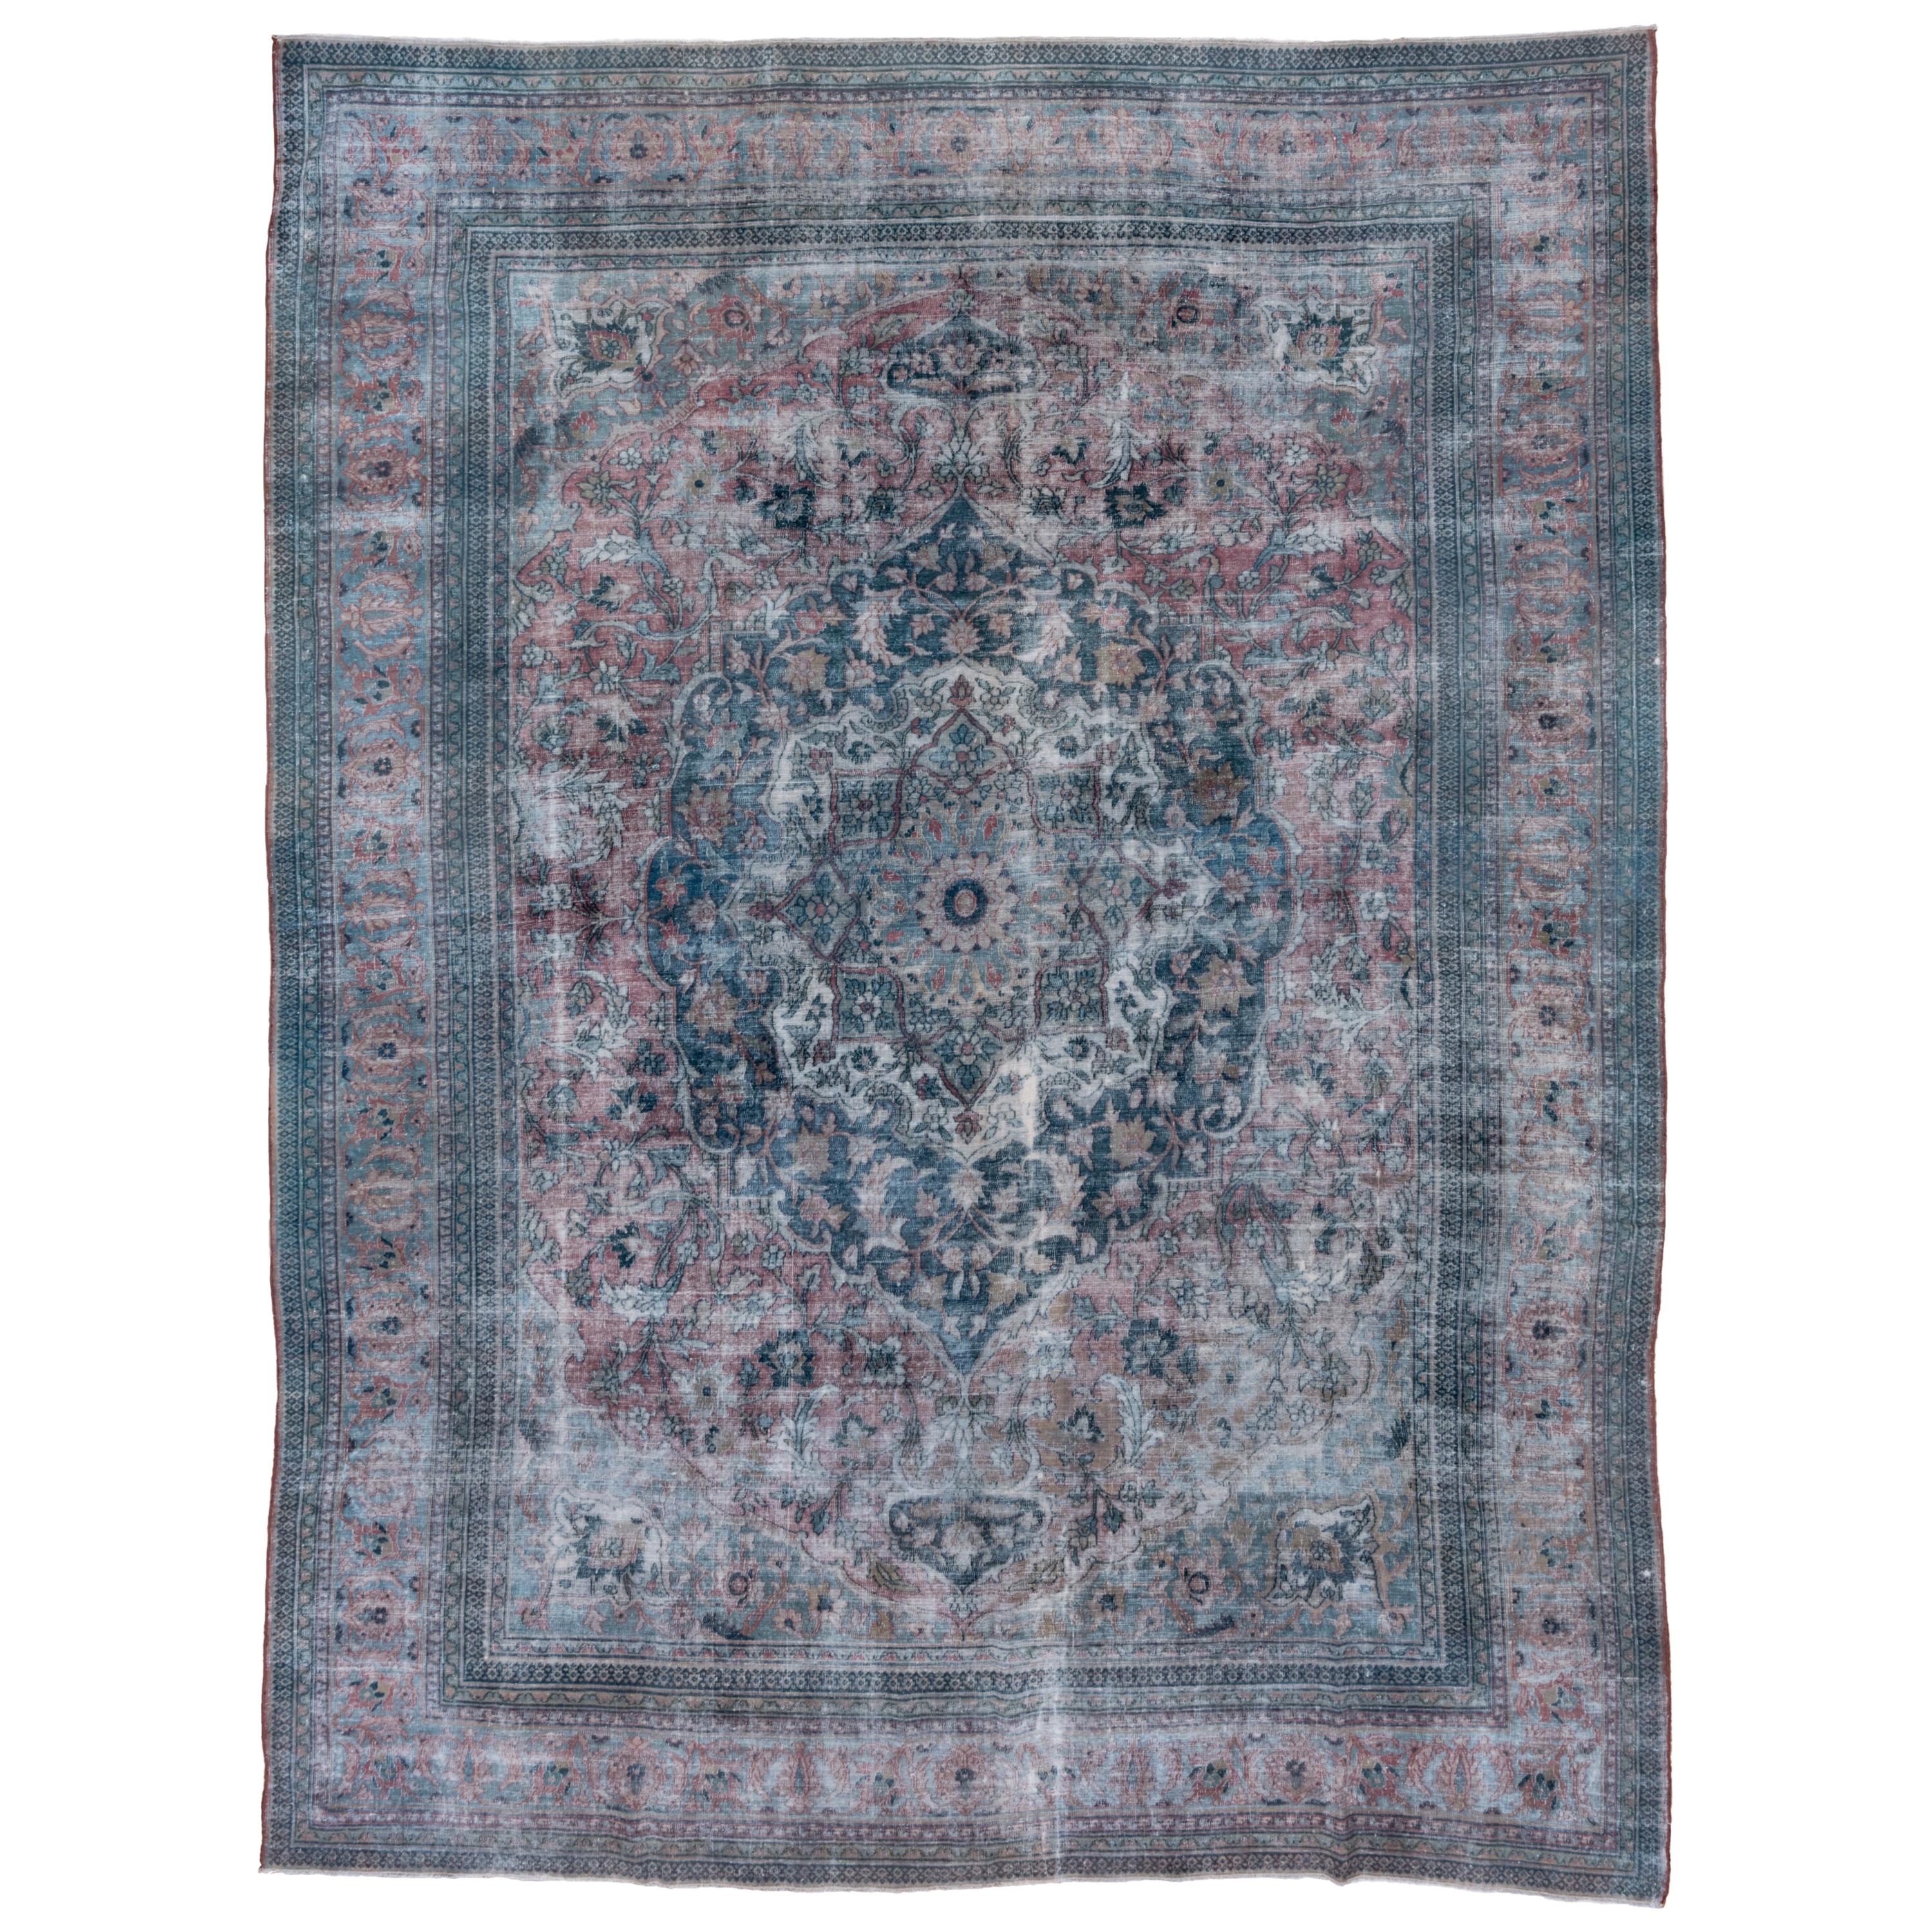 Shabby Chic Antique Persian Khorassan Rug, Blue & Pink Palette, Circa 1920s